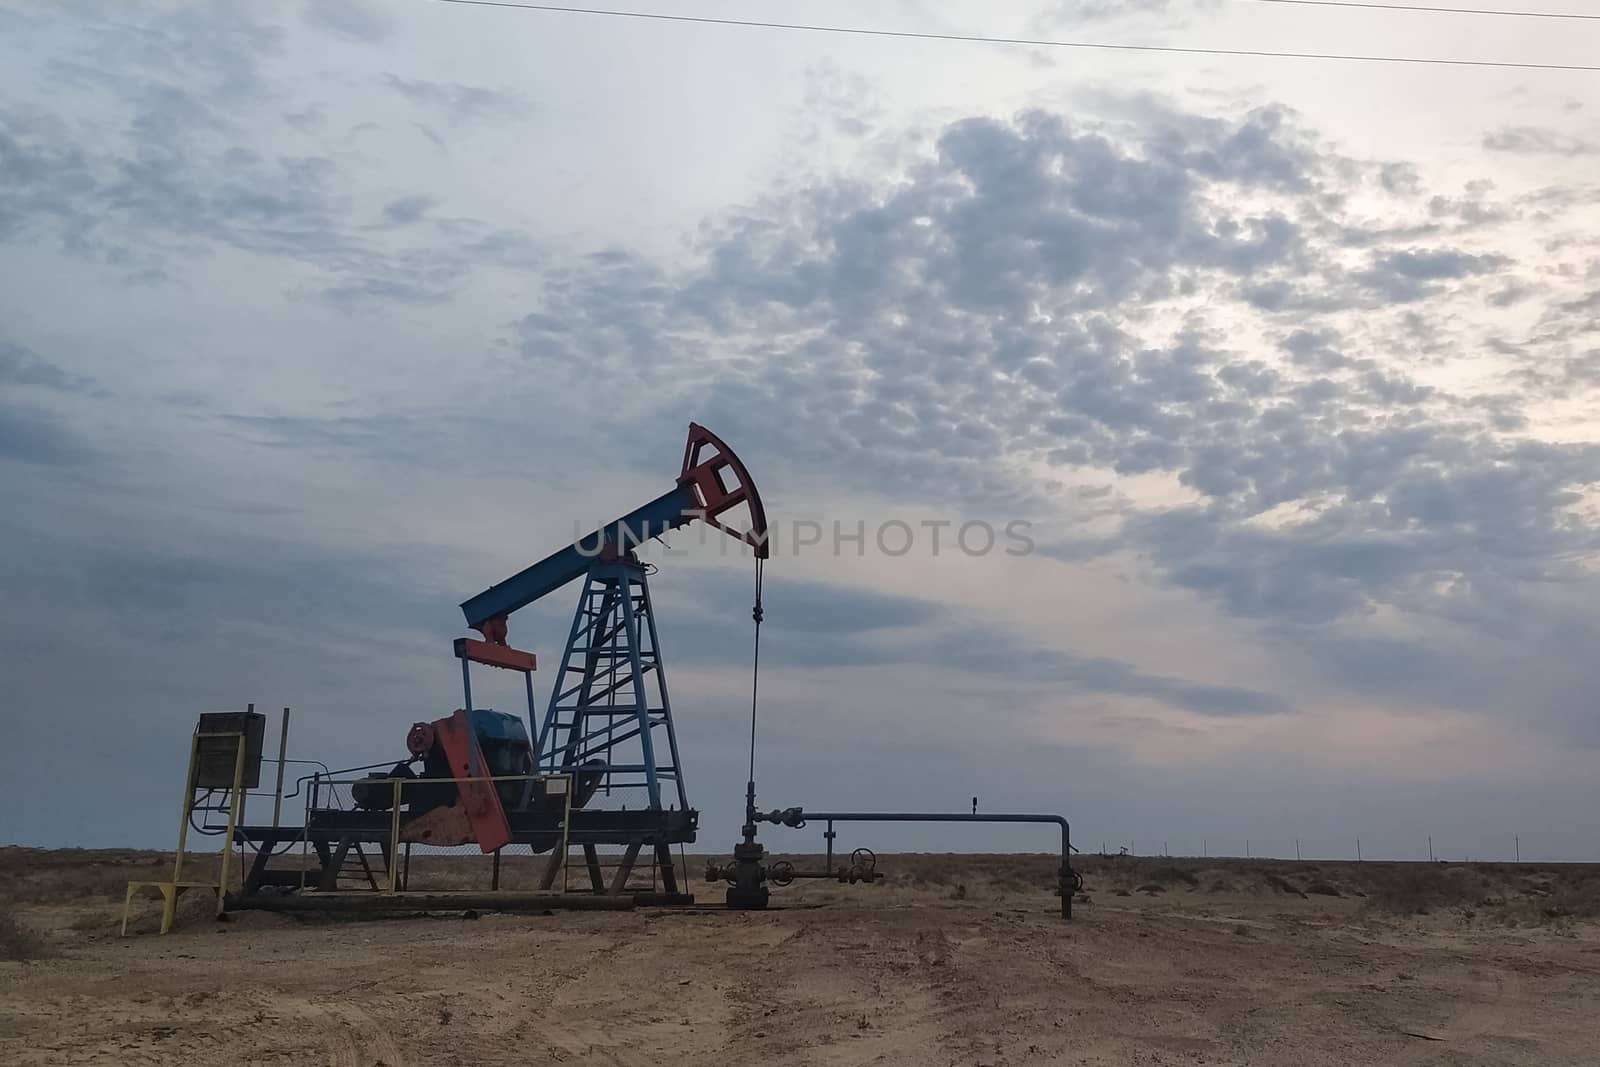 A rocking machine on an oil well. Oil production.